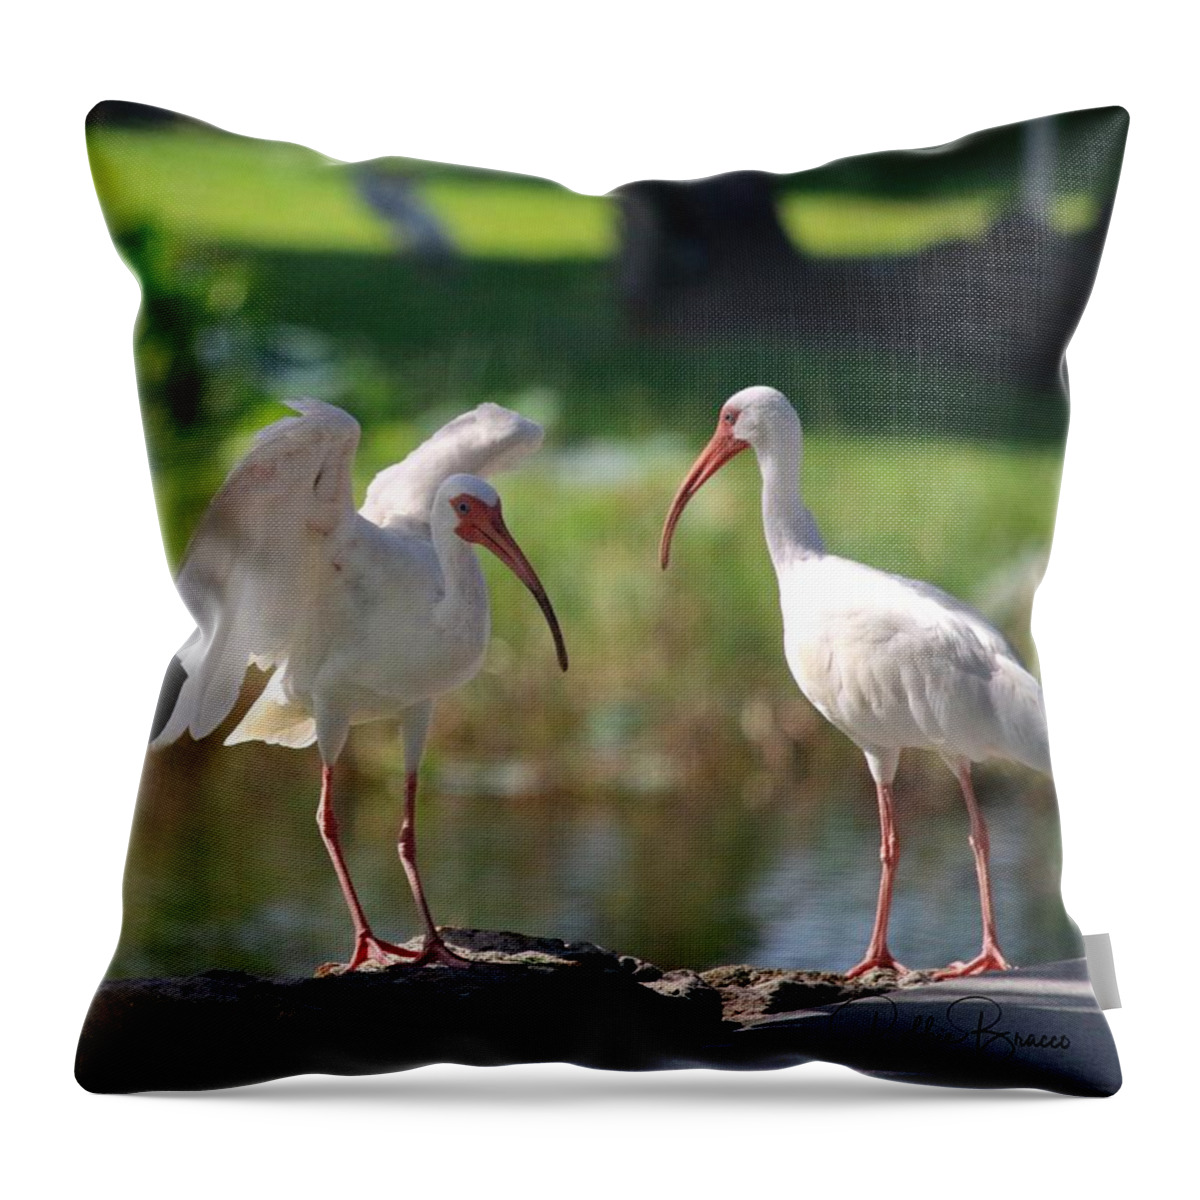 Talking Bird Business Throw Pillow featuring the photograph Talking Bird Business by Philip And Robbie Bracco